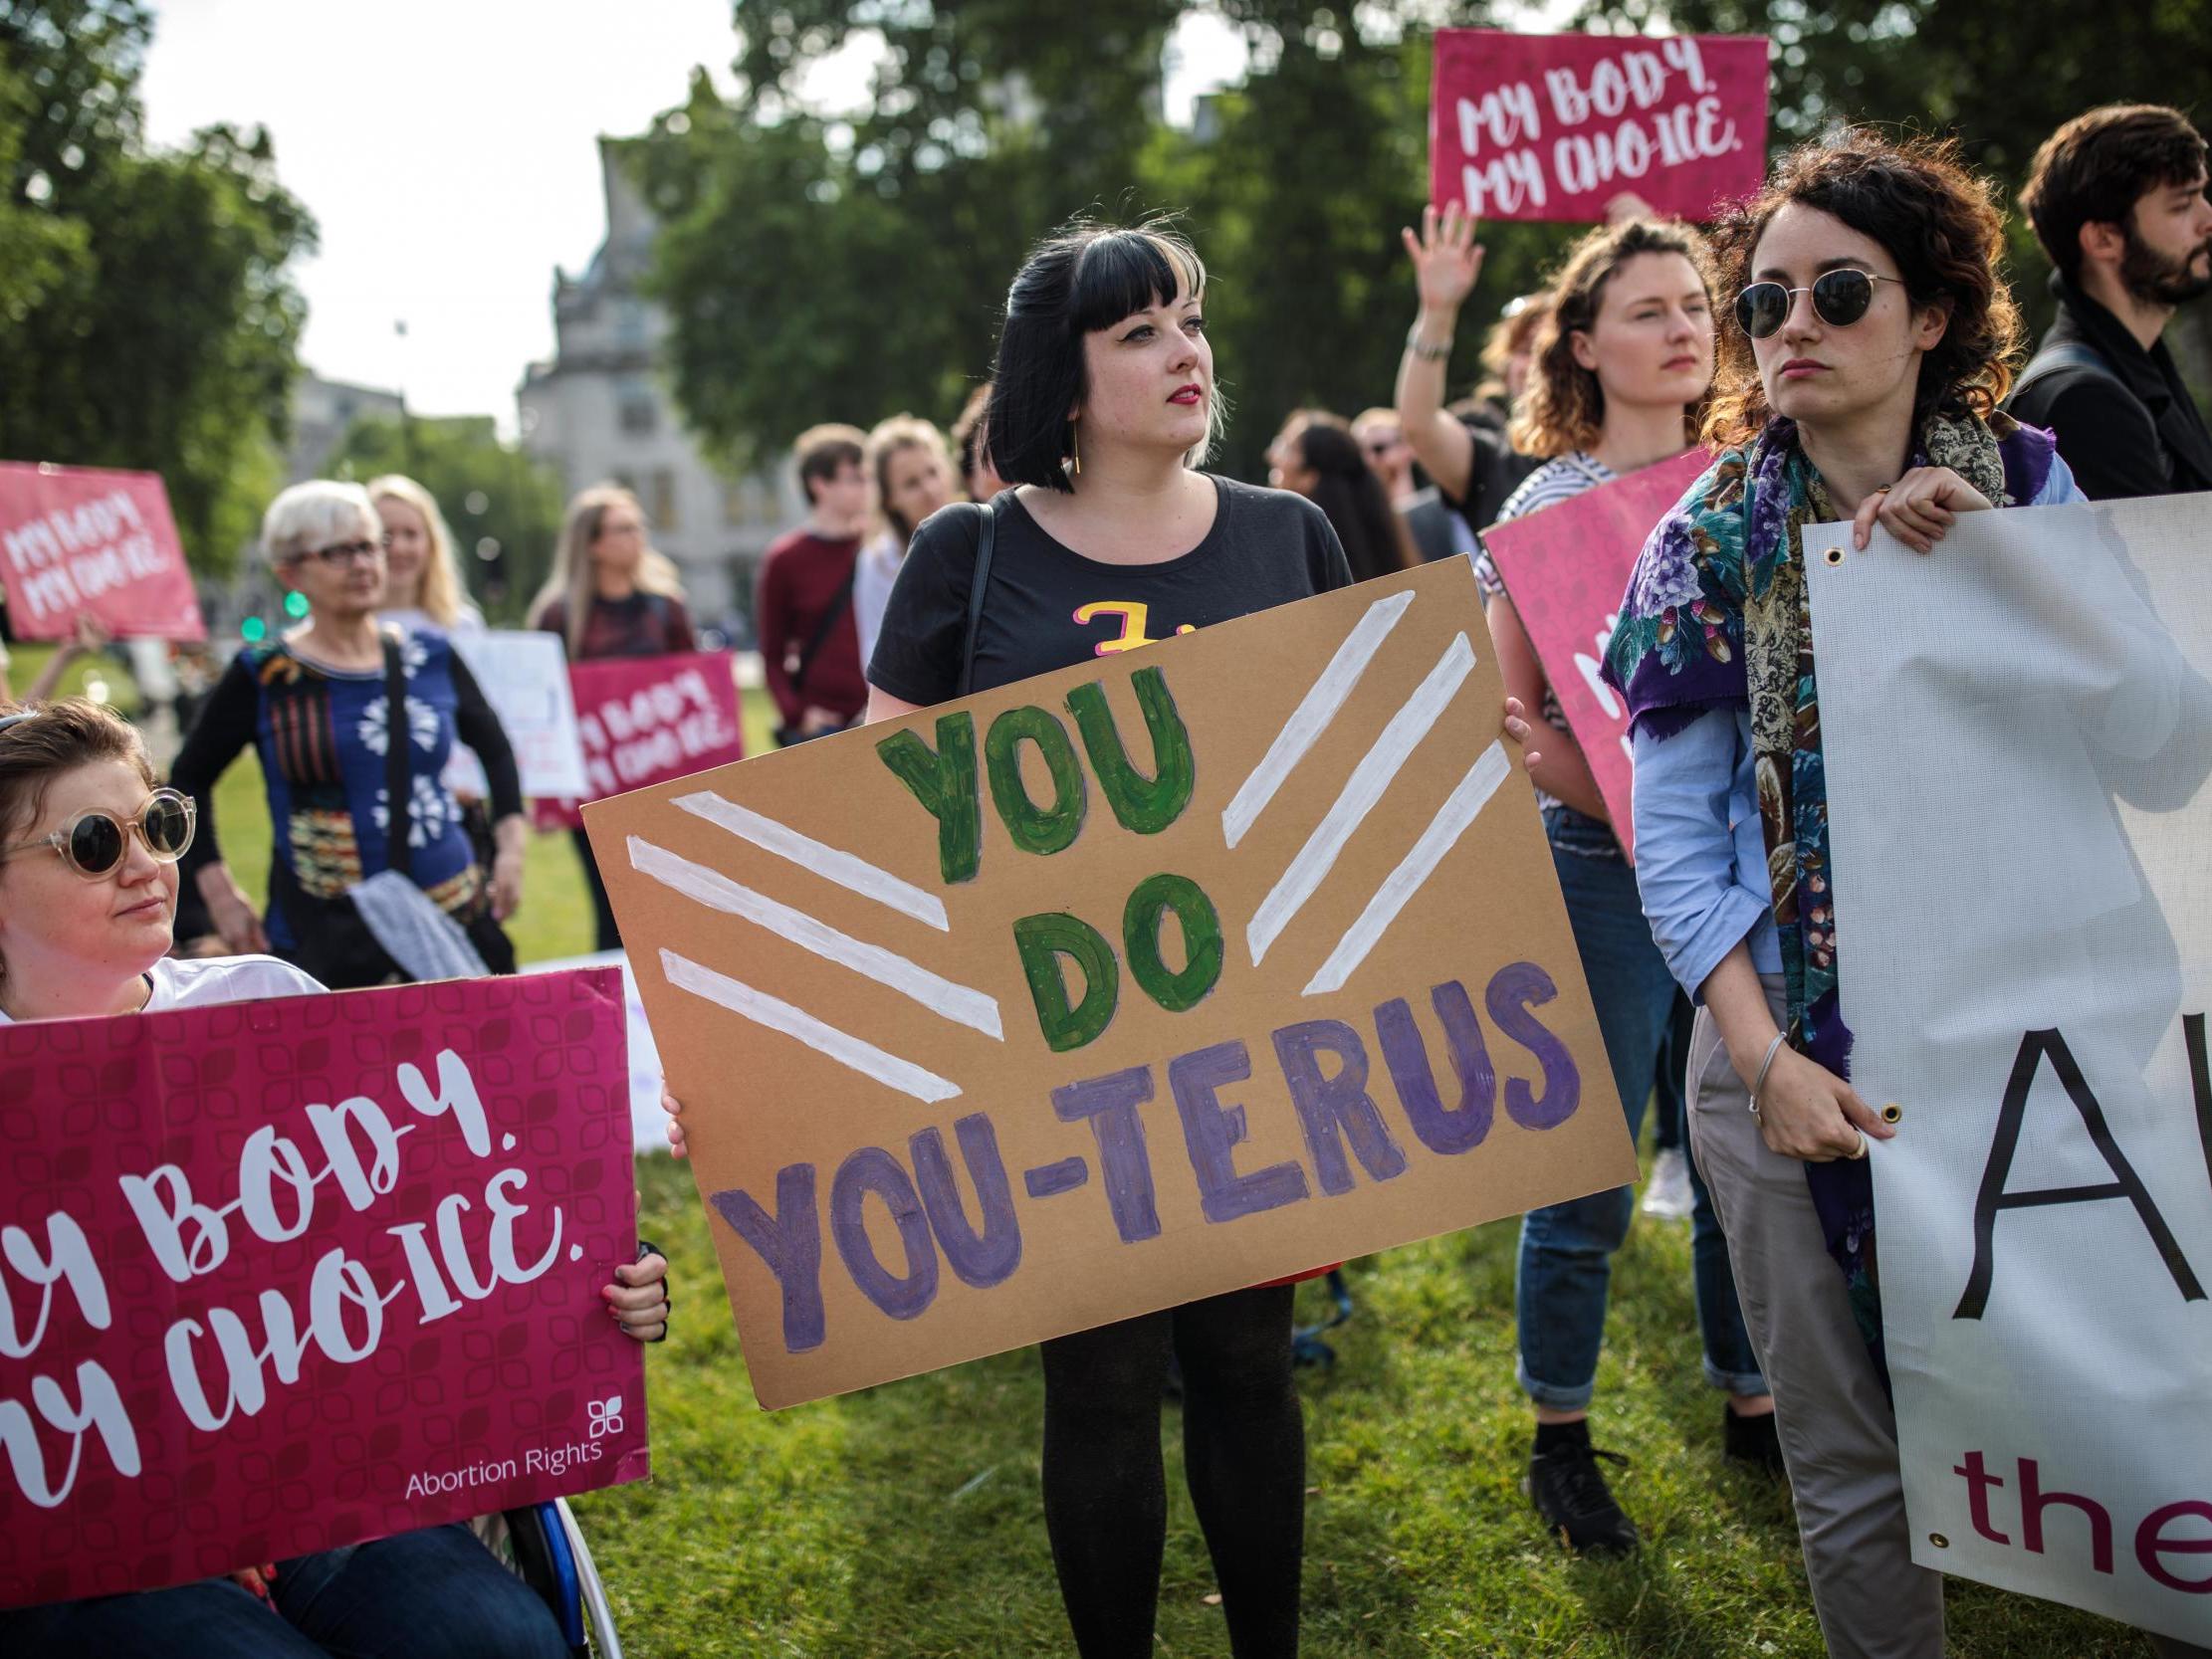 Calls for Northern Ireland's abortion laws to be reformed have been heightened after a referendum in the Republic of Ireland resoundingly backed liberalising legislation south of the border